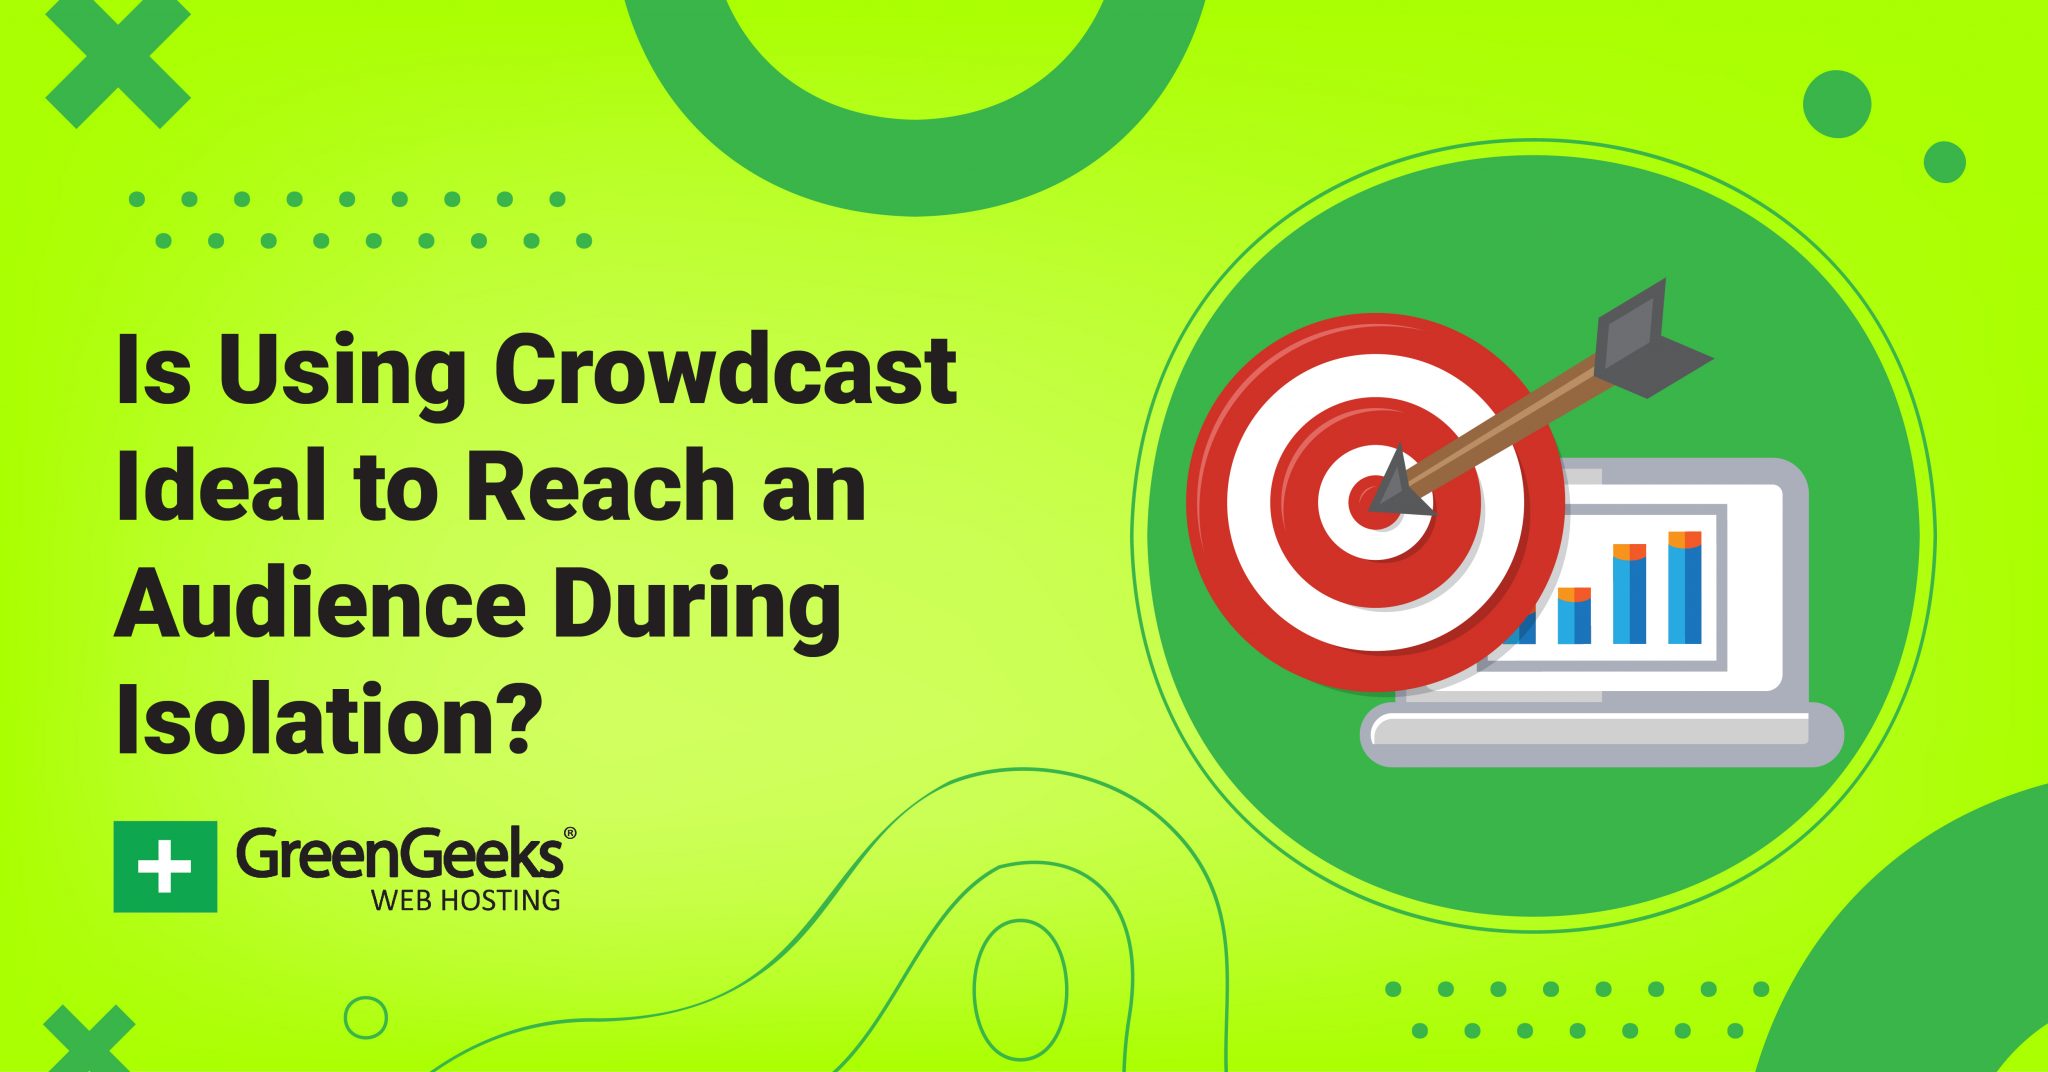 Is Using Crowdcast Ideal to Reach an Audience During Isolation?